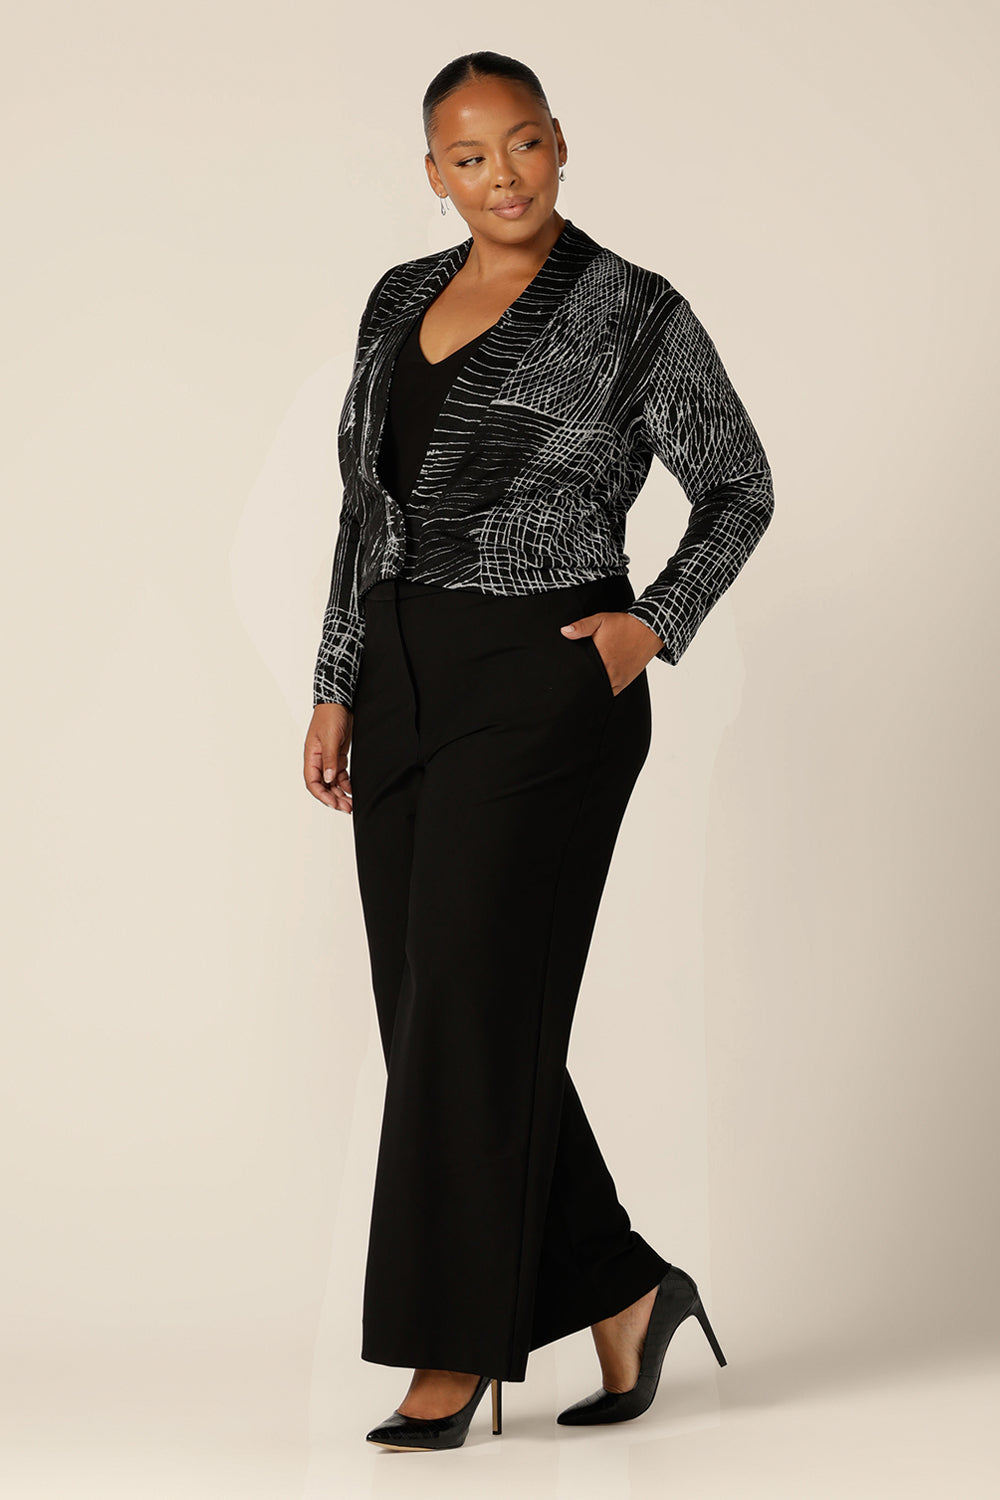 A blend of jacket and cardigan, this textured knit 'jacardi' is a great way to layer up for winter. Worn by a plus size, size 18 woman, this knit jacket is worn with a black V-neck top and tailored black pants for winter workwear style.